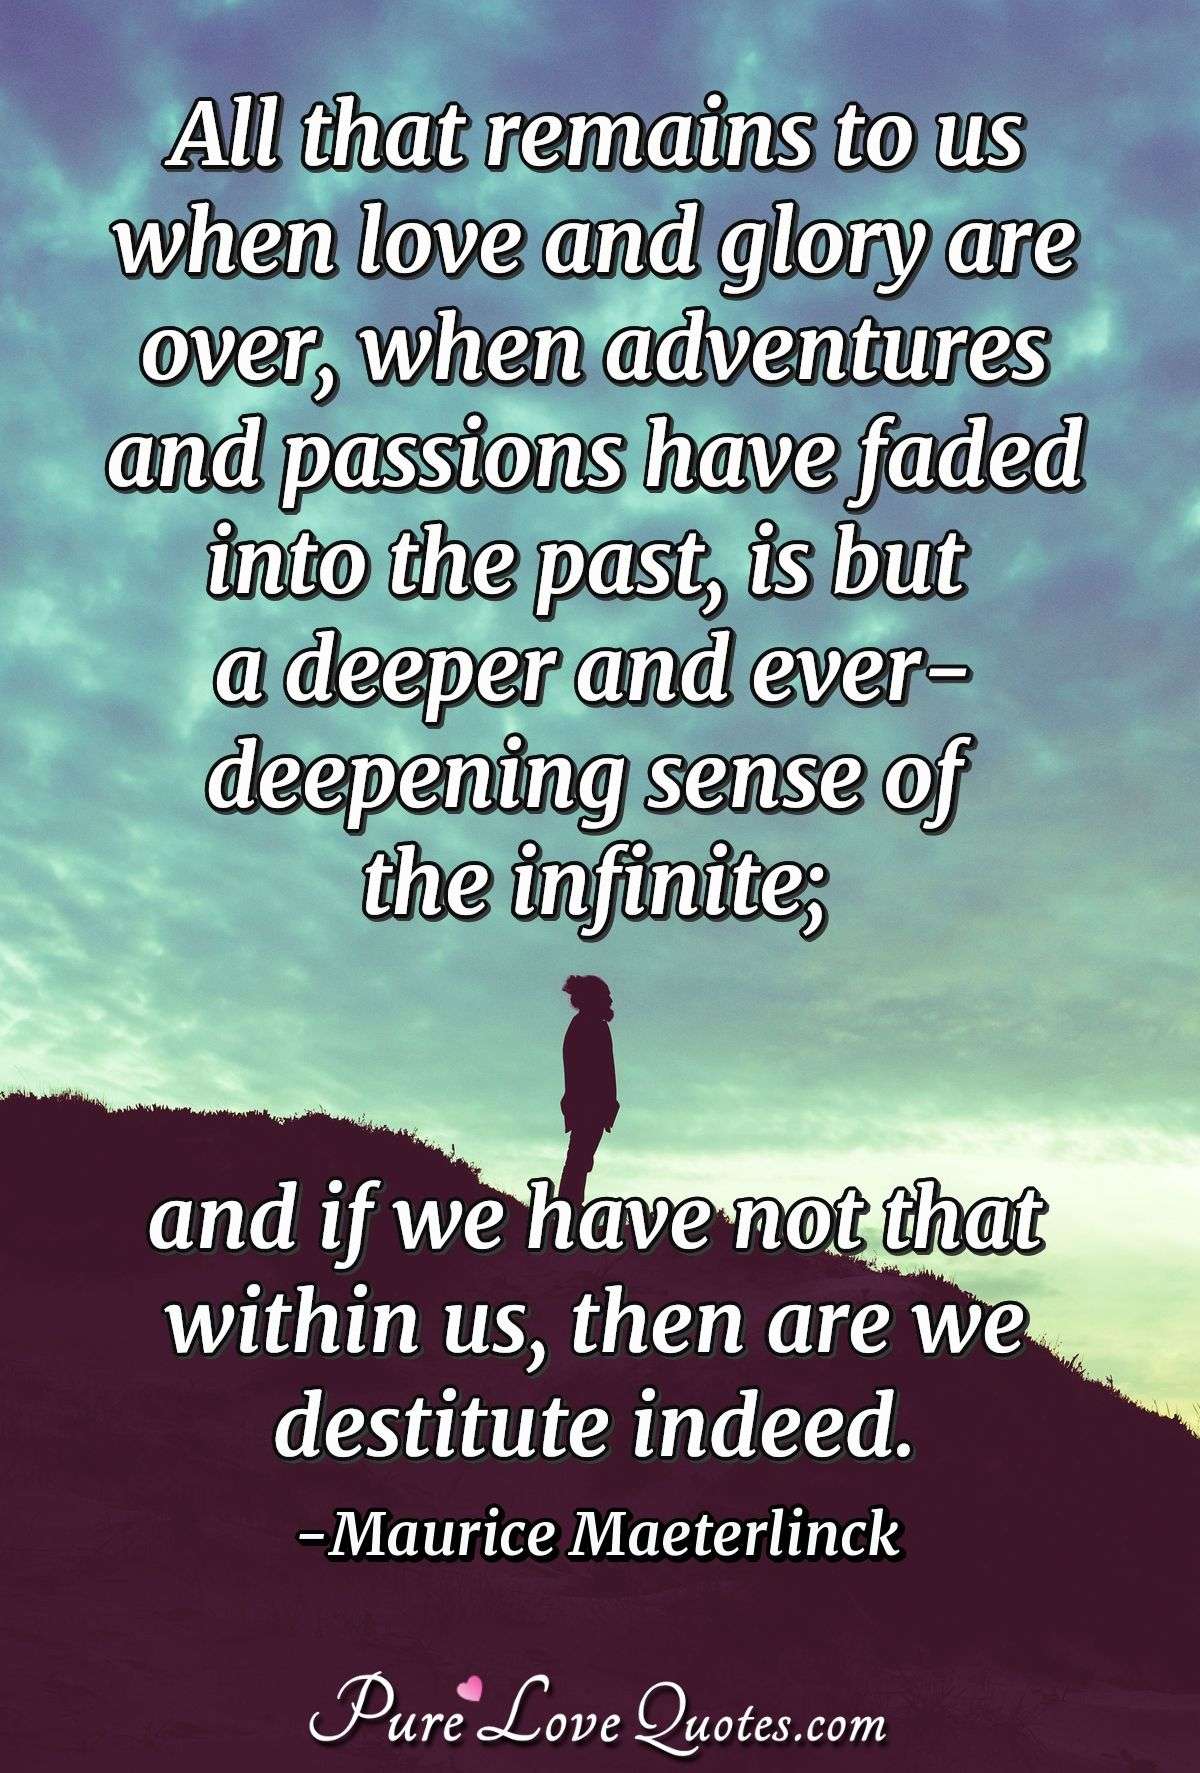 All that remains to us when love and glory are over, when adventures and passions have faded into the past, is but a deeper and ever-deepening sense of the infinite; and if we have not that within us, then are we destitute indeed. - Maurice Maeterlinck